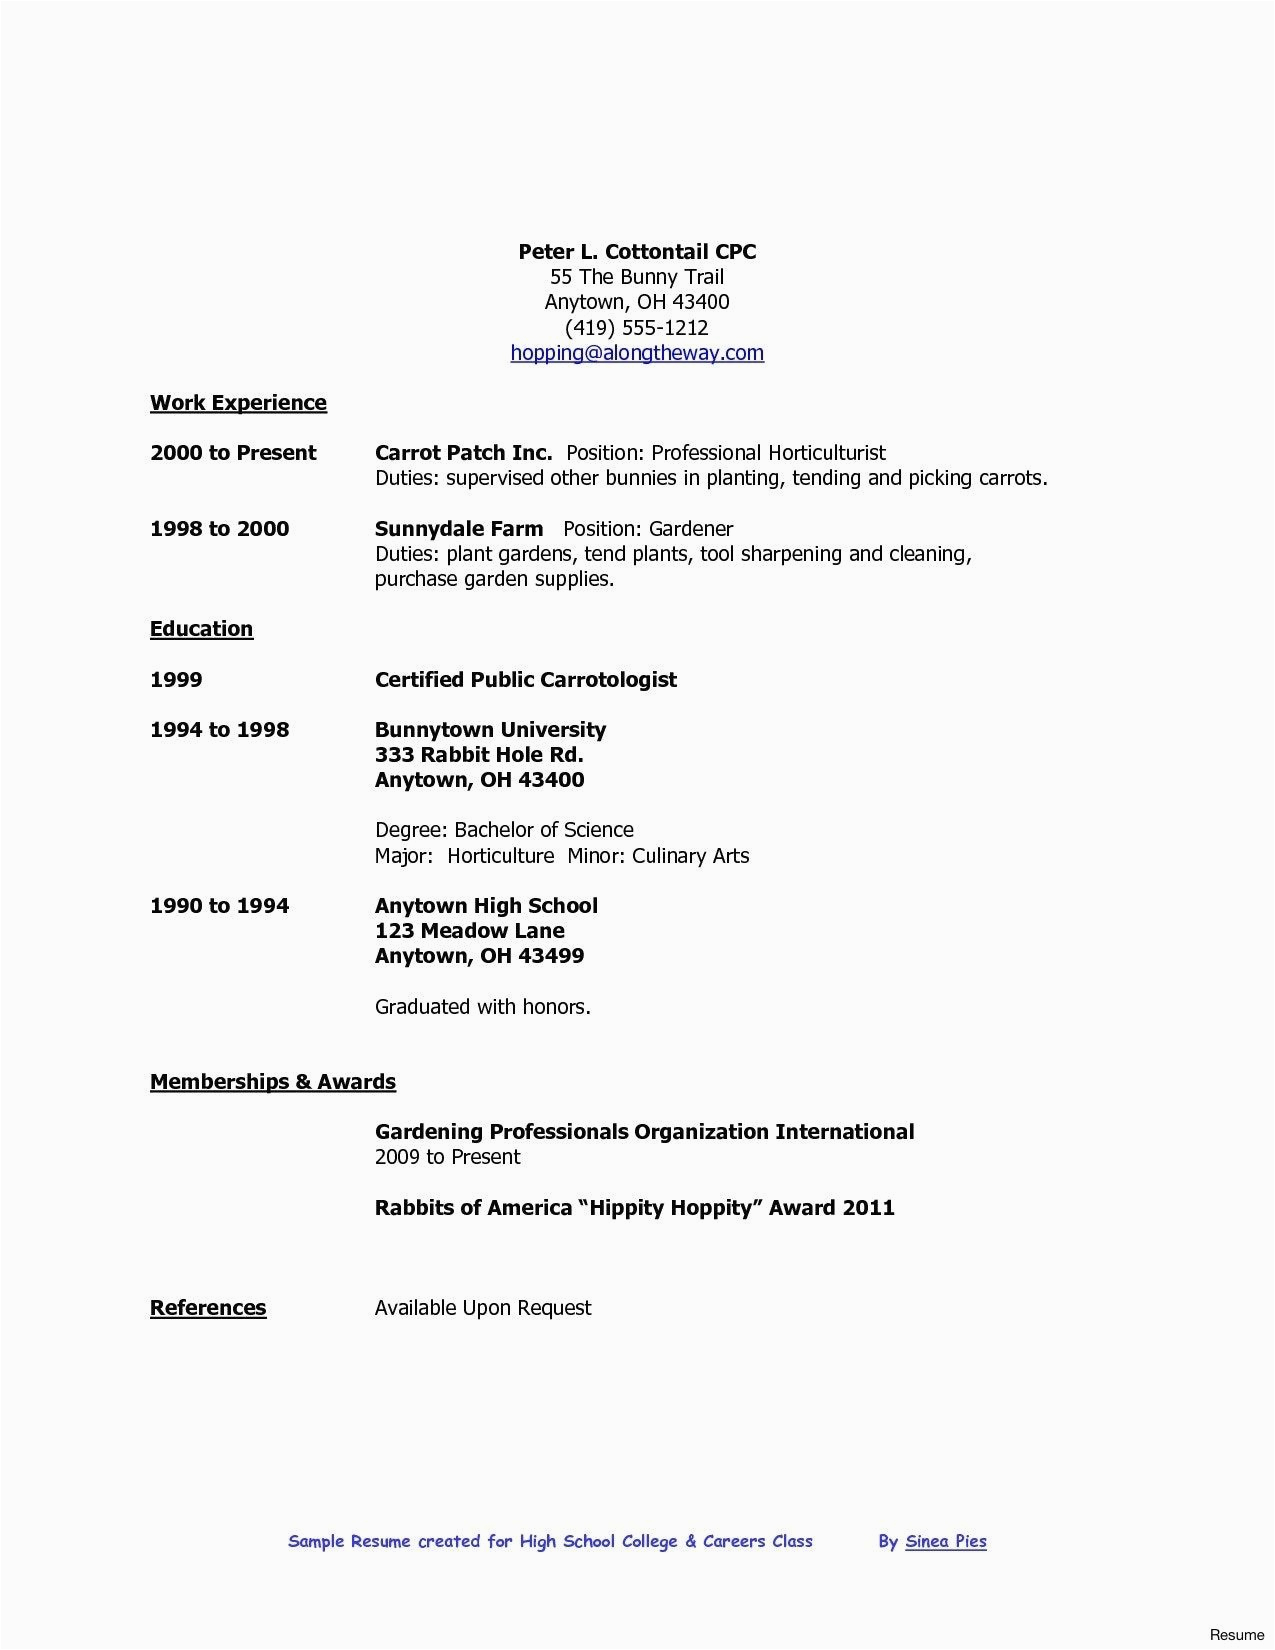 Sample Resume for Highschool Graduate with Little Experience Resume format High School Graduate format Graduate